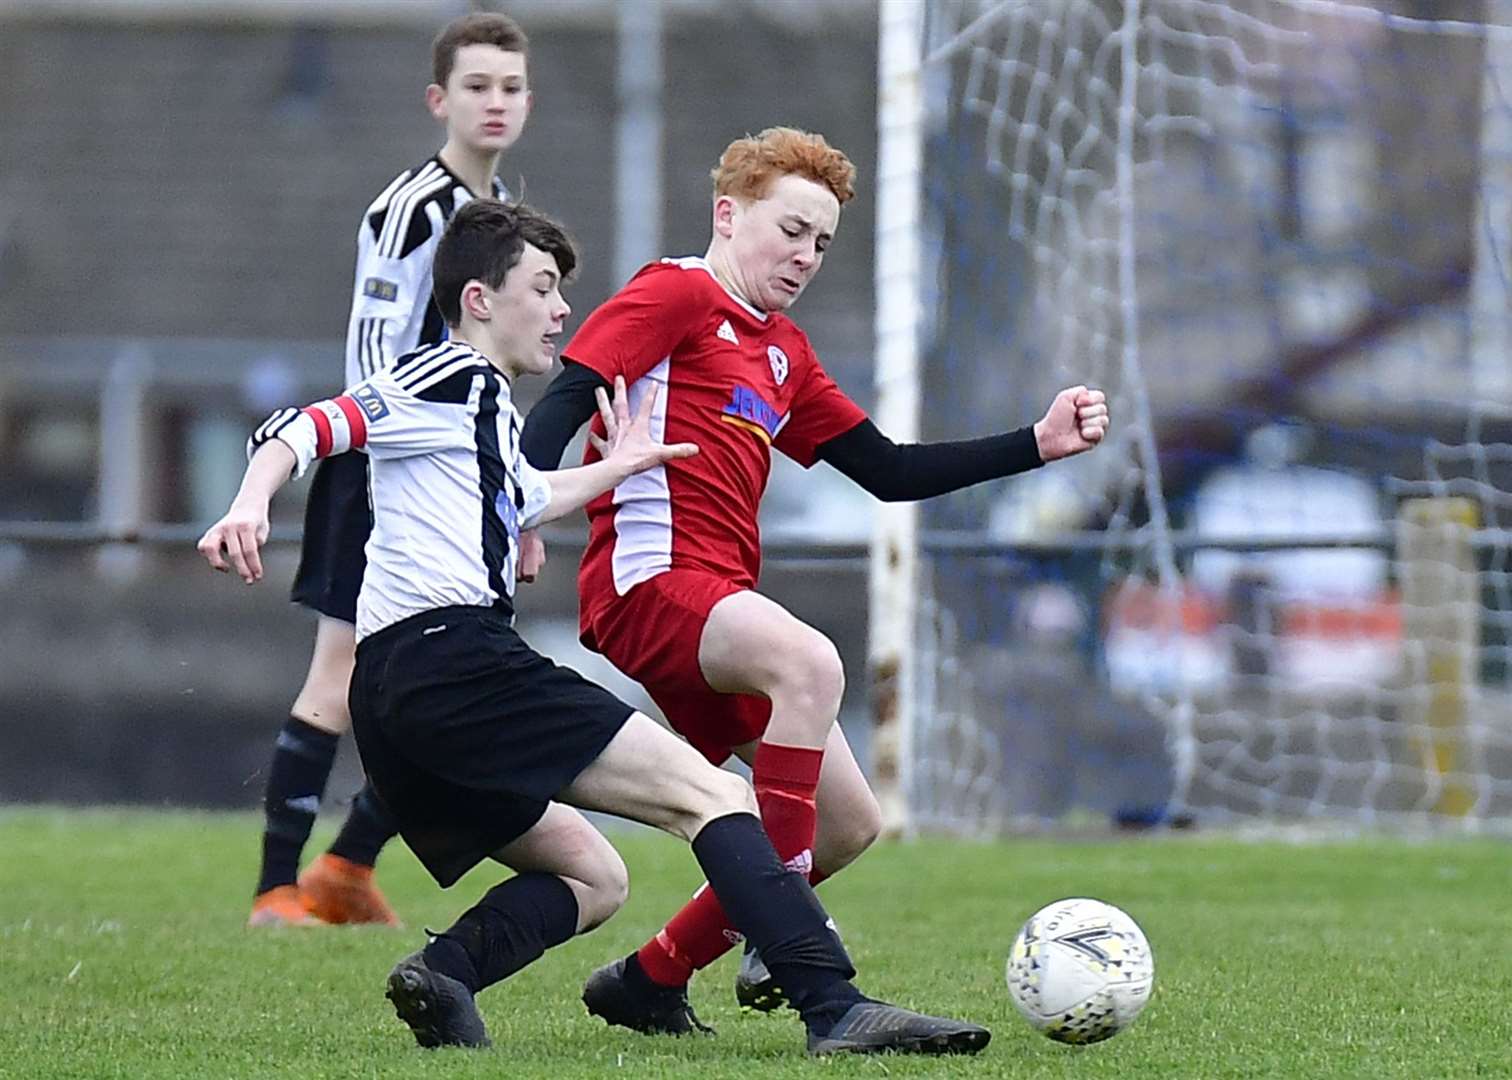 Aidan Miller of Wick Academy under-15s challenges Do Soccer's Ross Nicol. Picture: Mel Roger